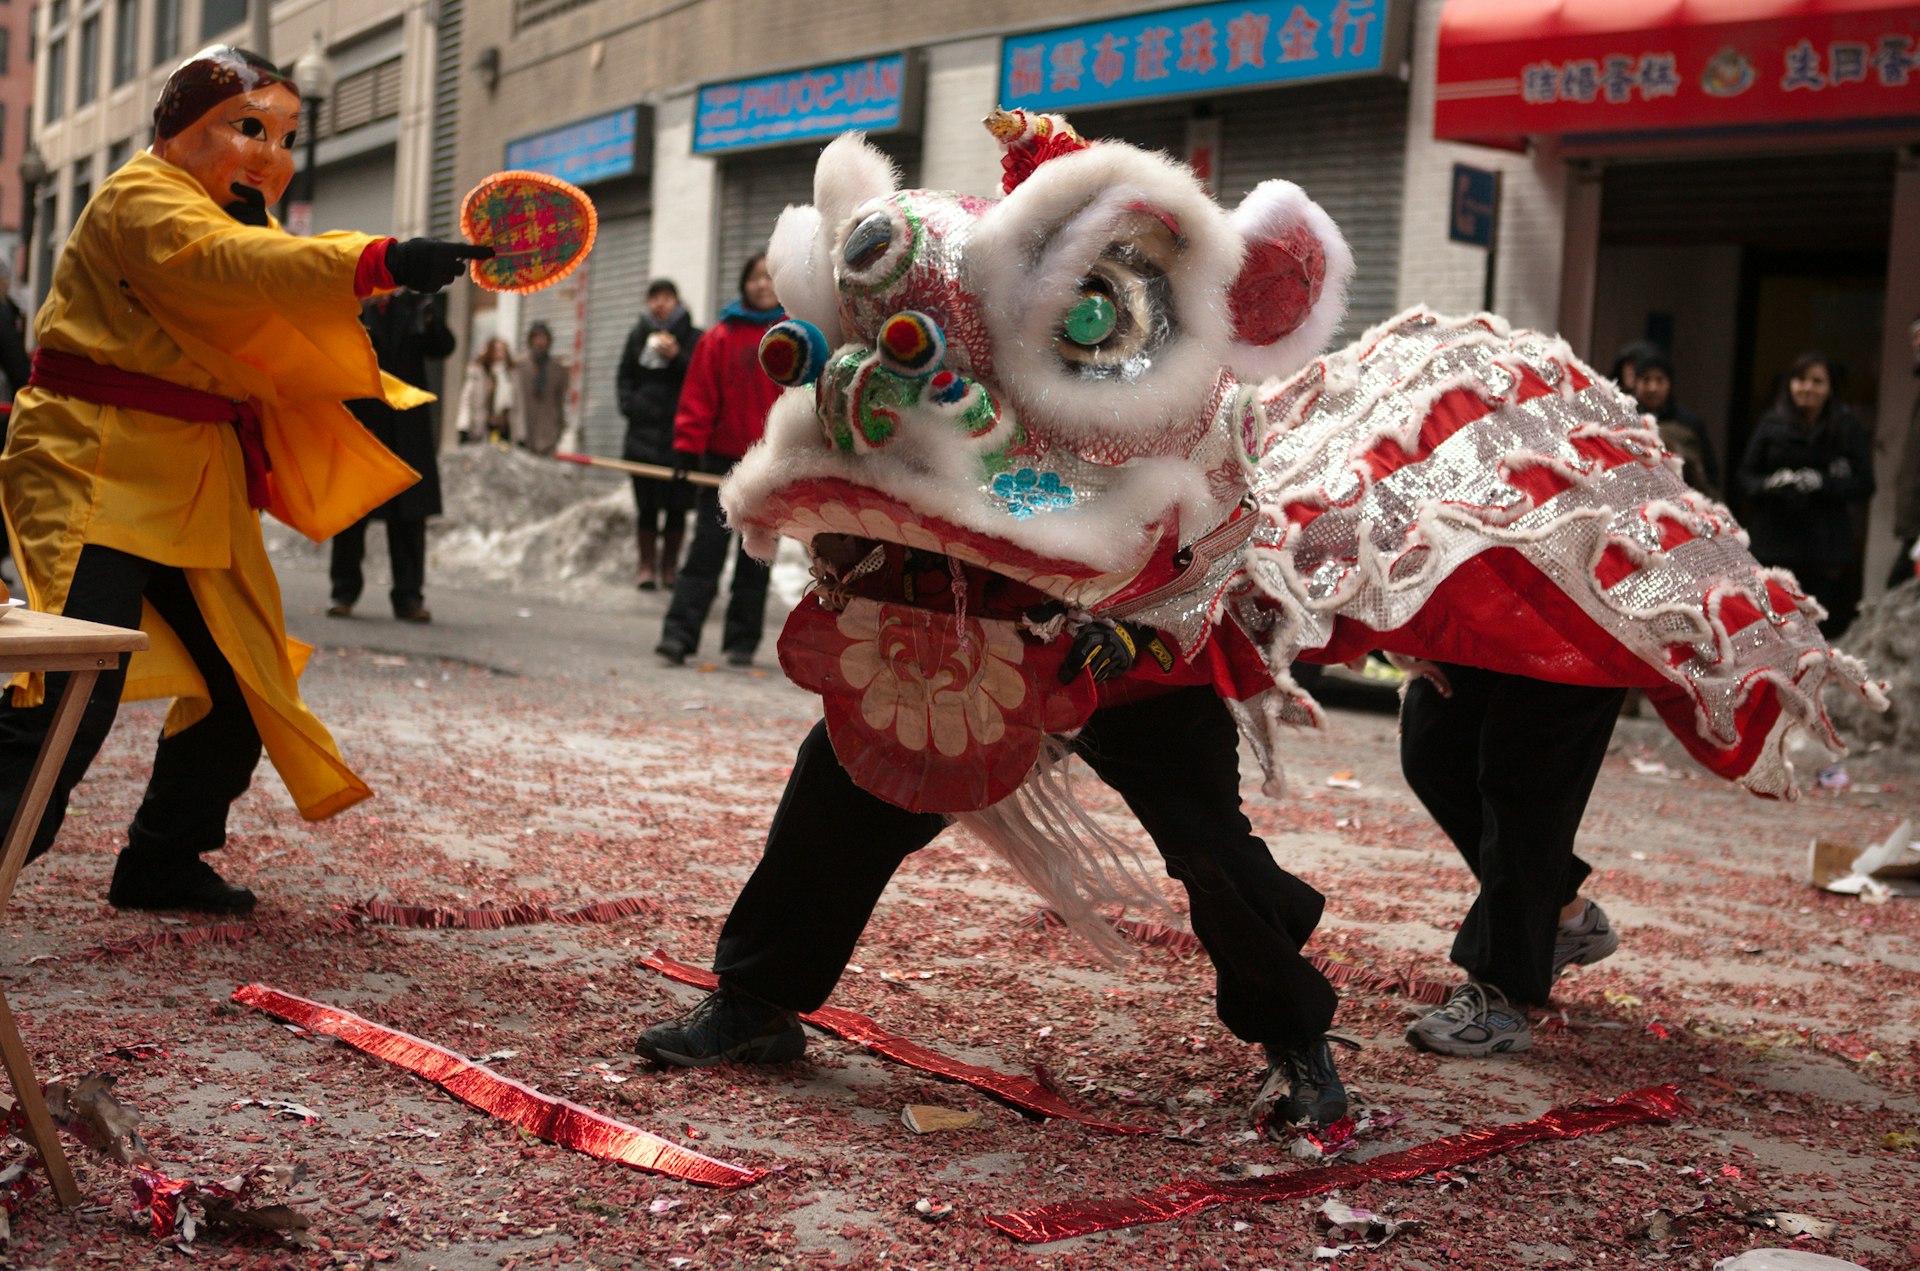 The dragon dance performed at the Lunar New Year celebration in Boston.